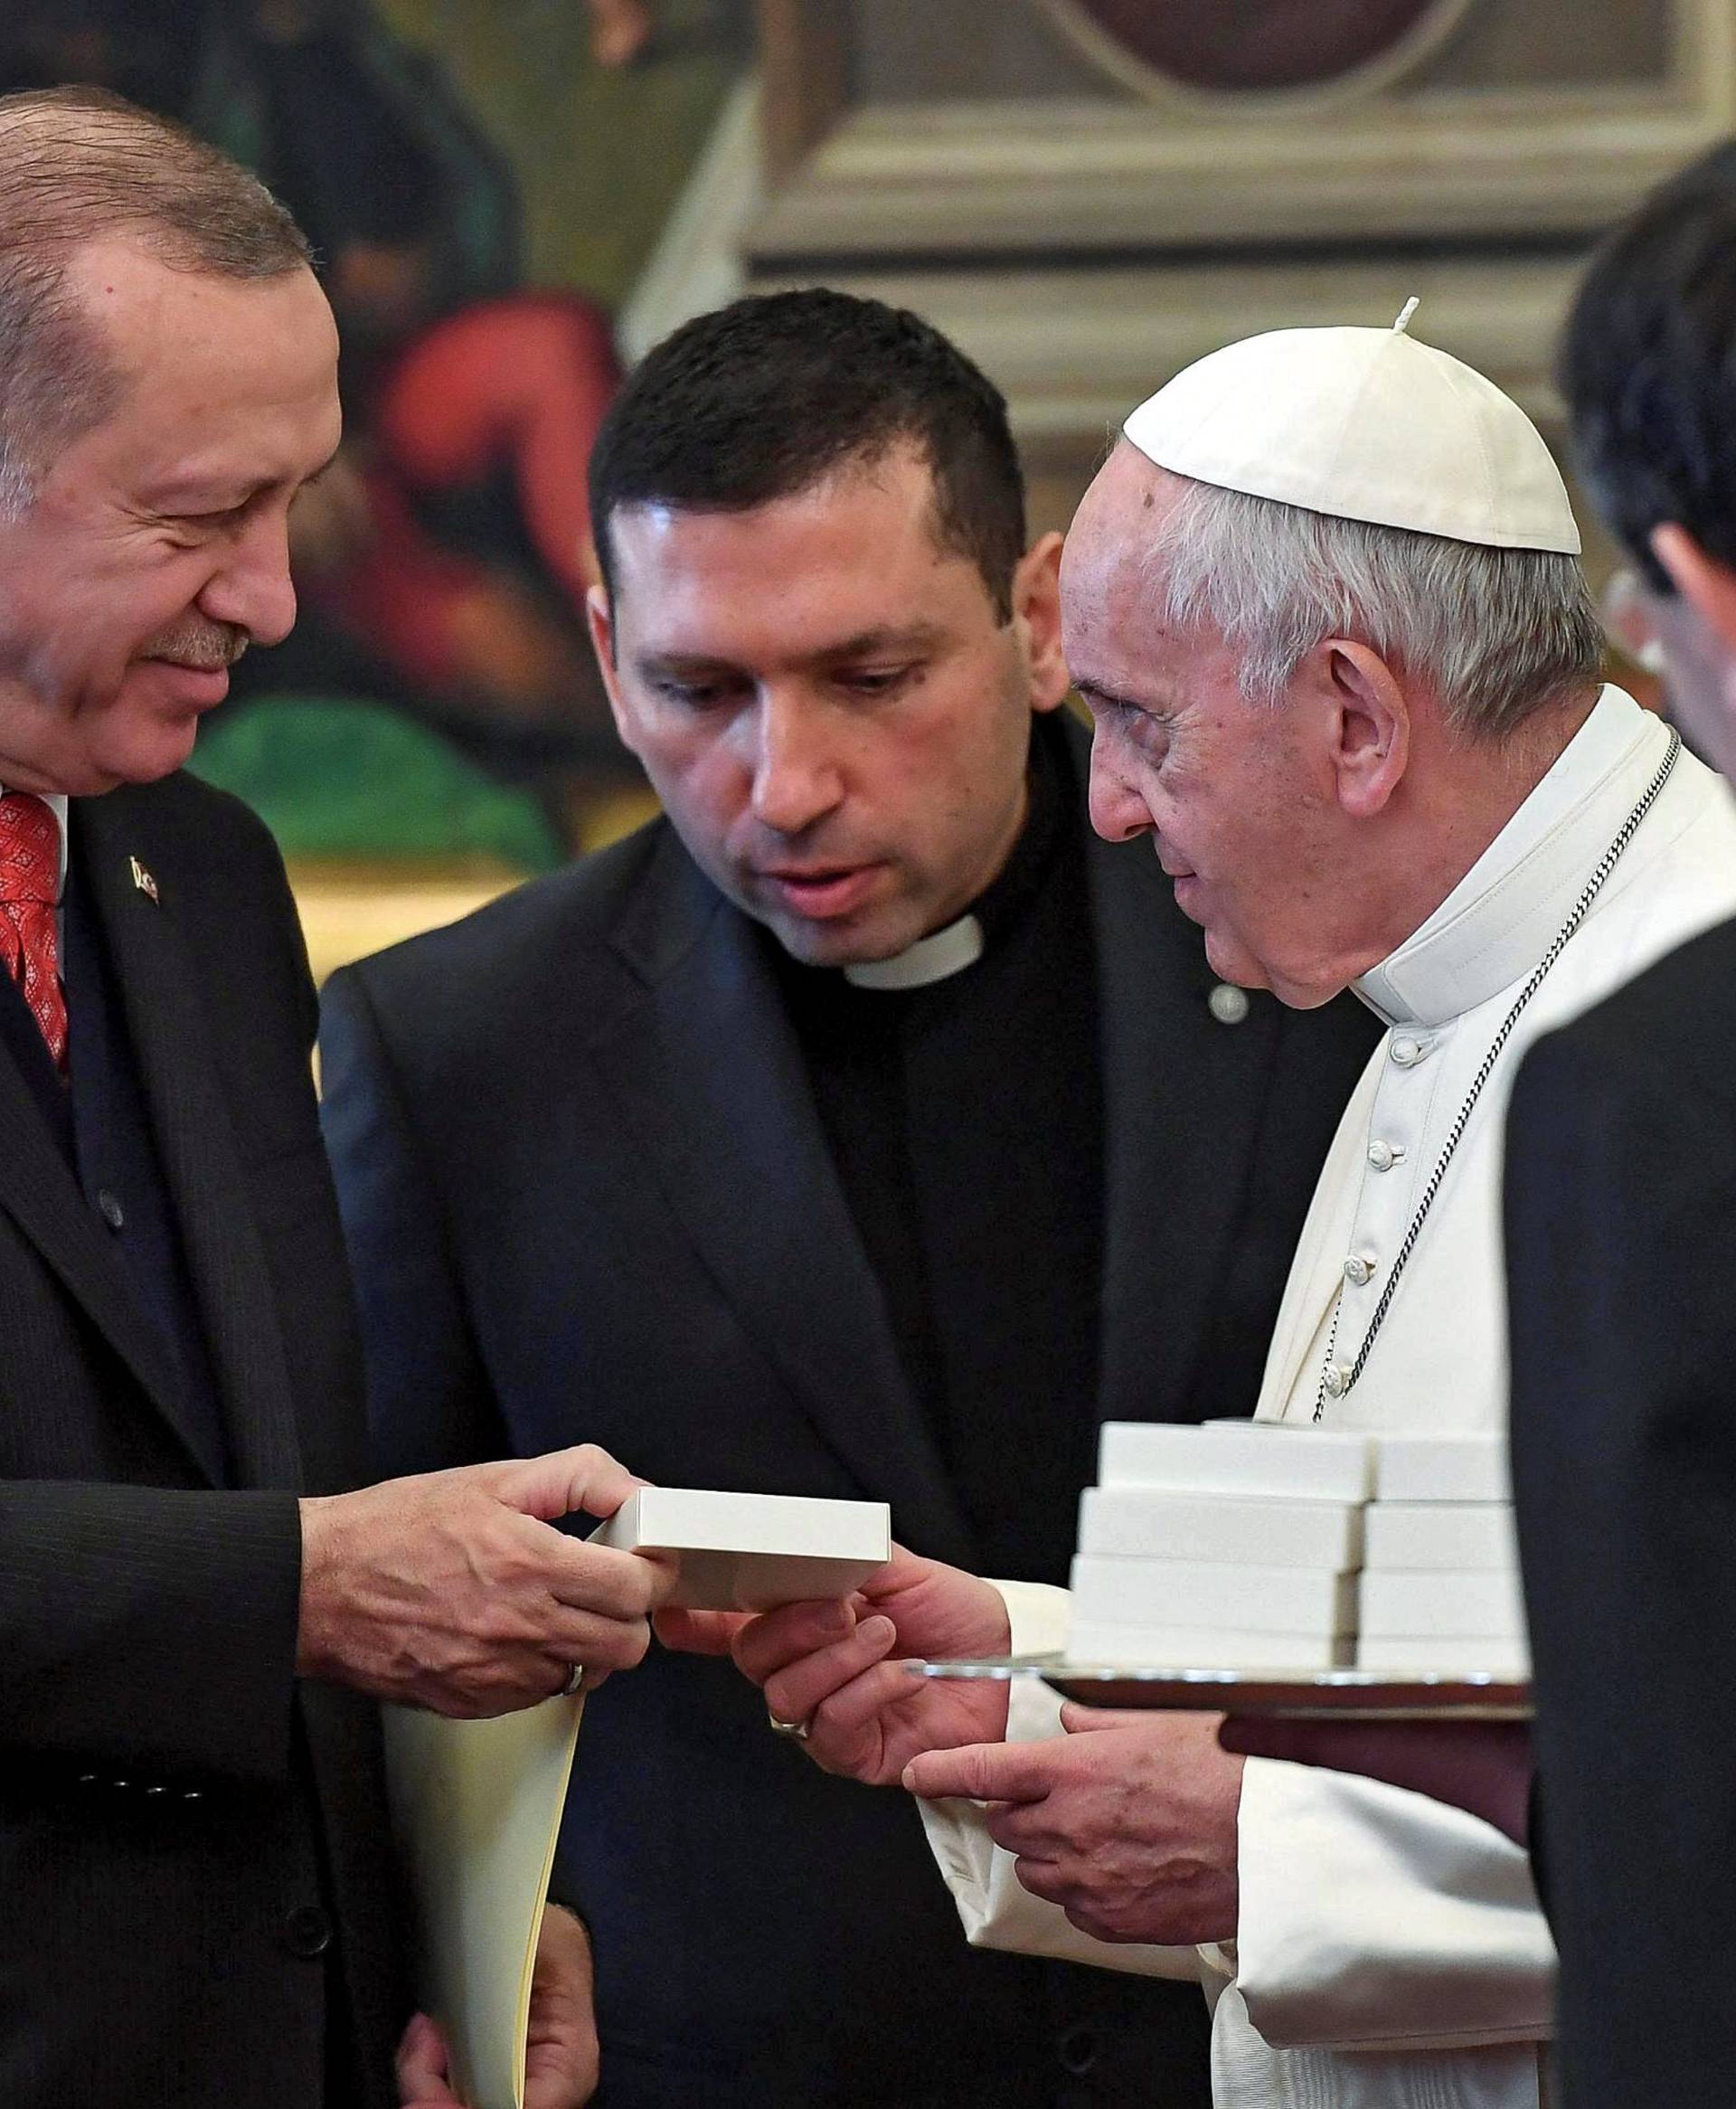 Pope Francis exchanges gift with Turkish President Tayyip Erdogan and his wife Emine during a private audience at the Vatican